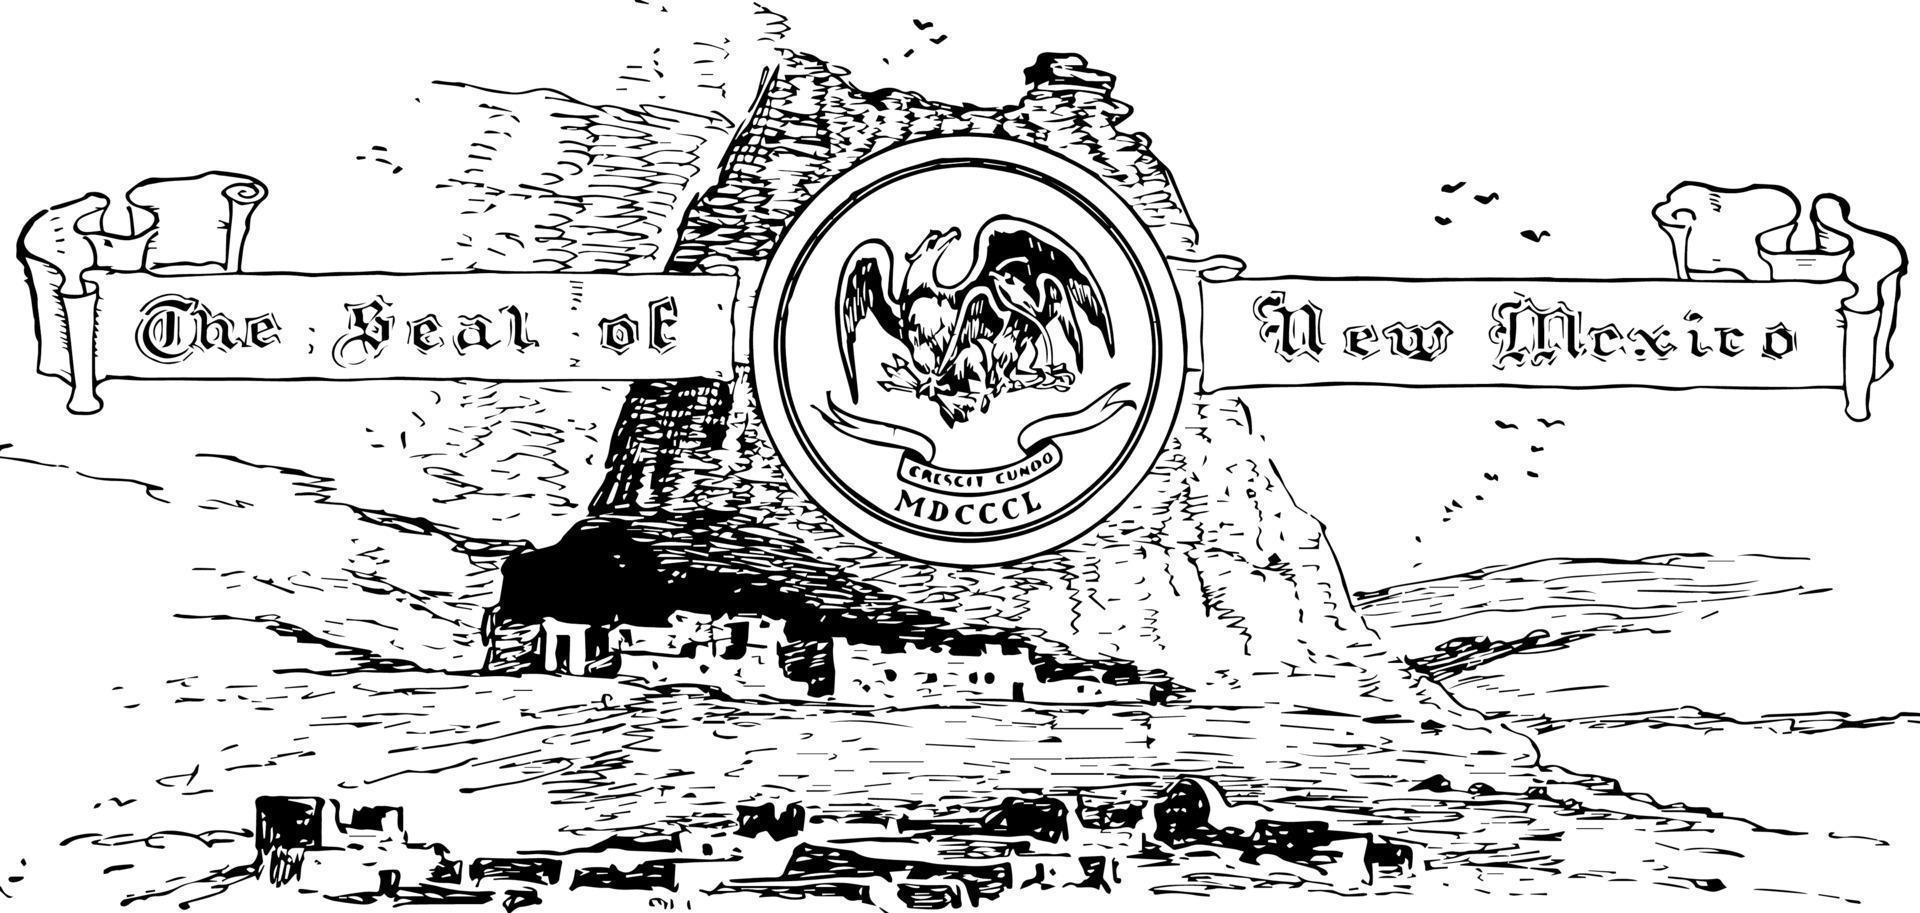 The United States seal of New Mexico, vintage illustration vector